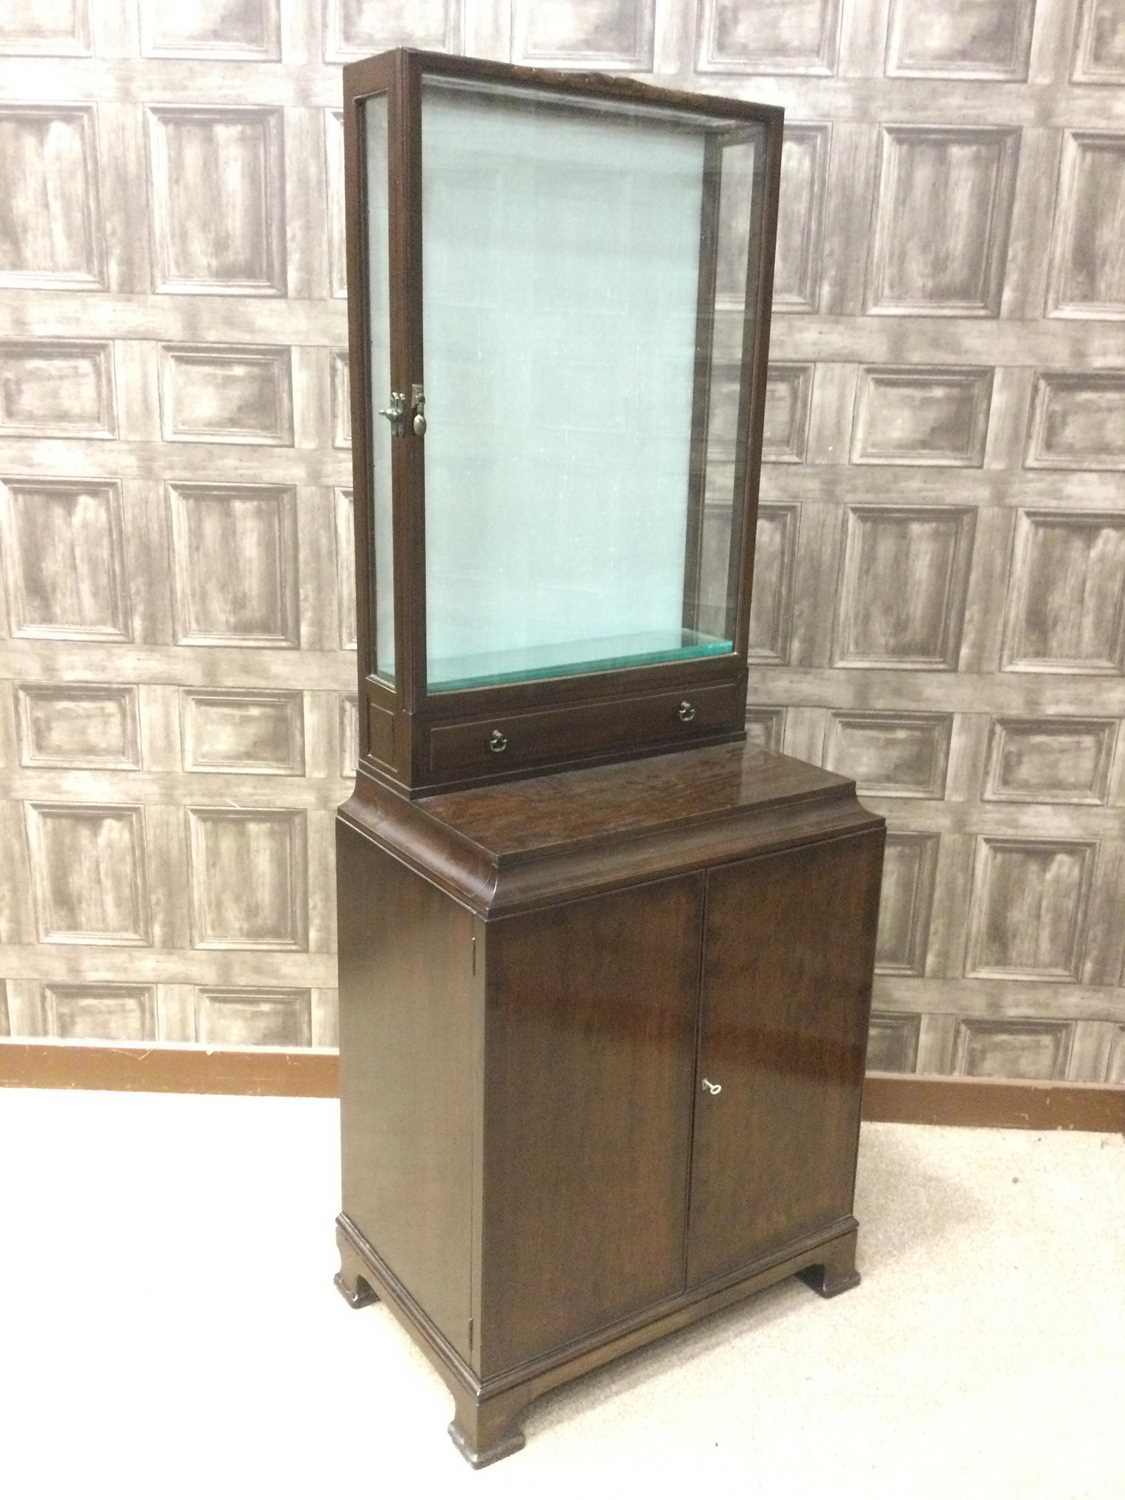 Lot 1360 - A WHYTOCK & REID MAHOGANY DISPLAY CABINET ON STAND